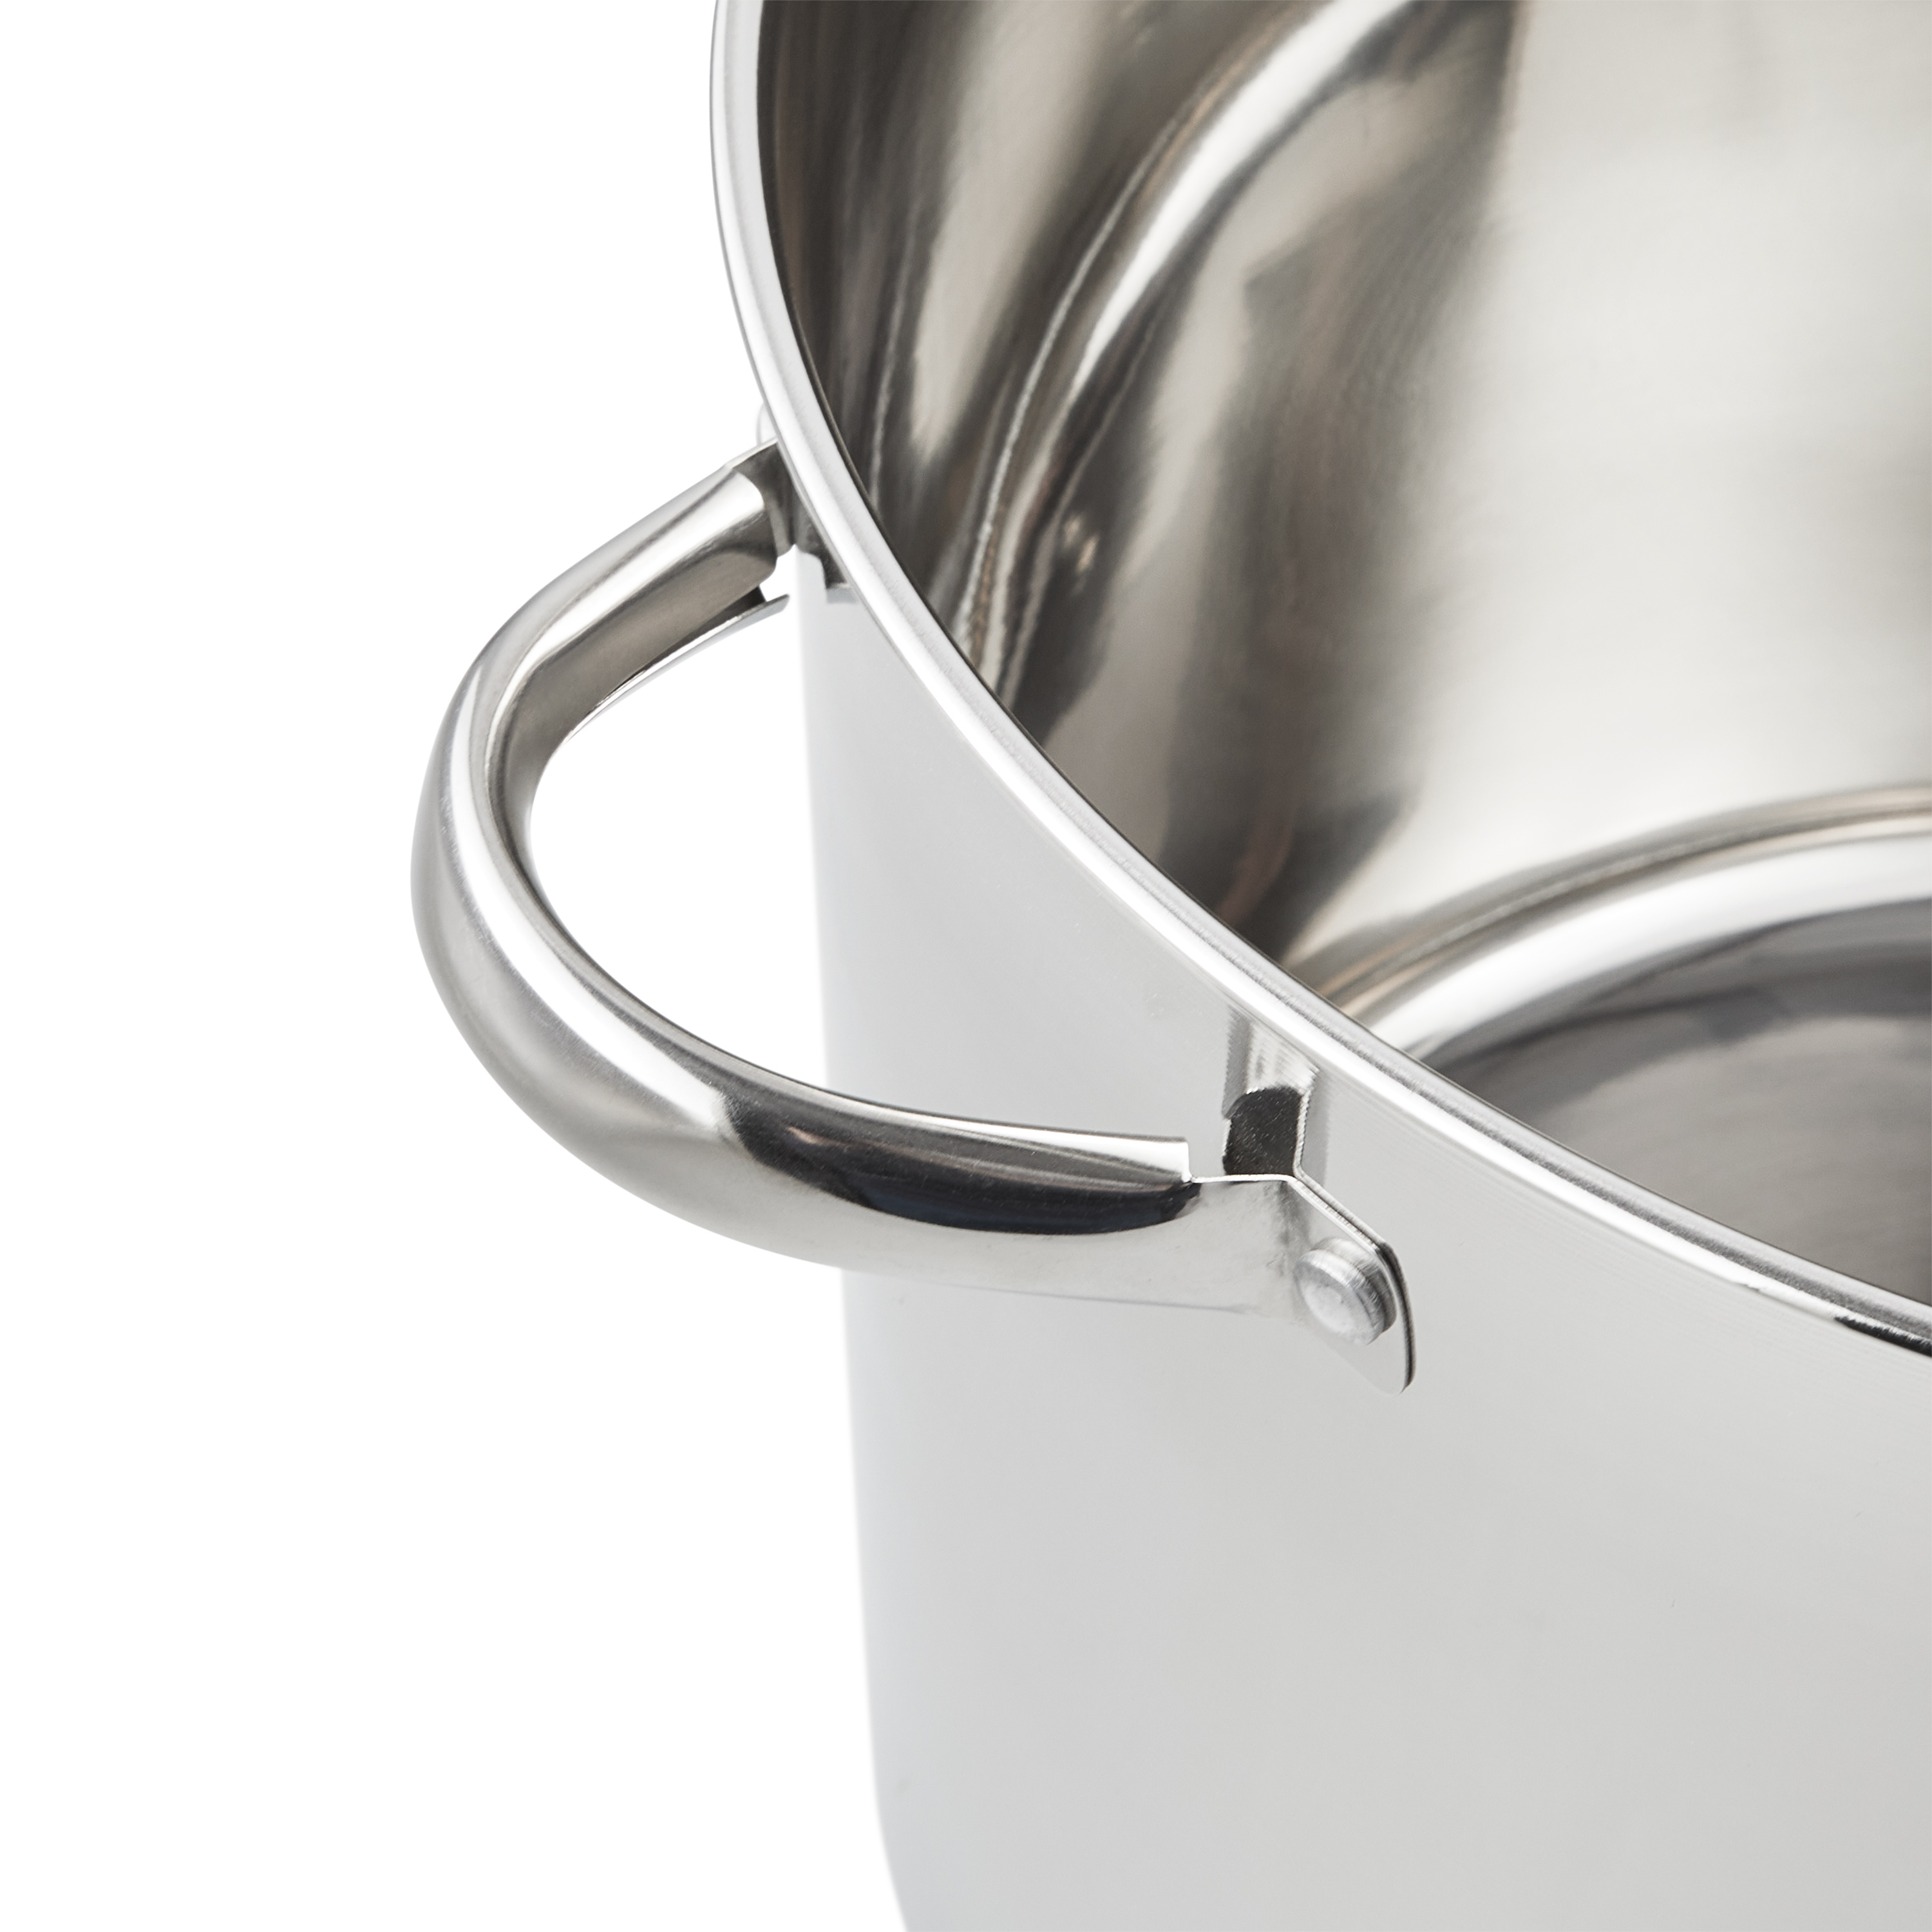 Mainstays Stainless Steel 20-Quart Stock Pot with Glass Lid - image 5 of 6